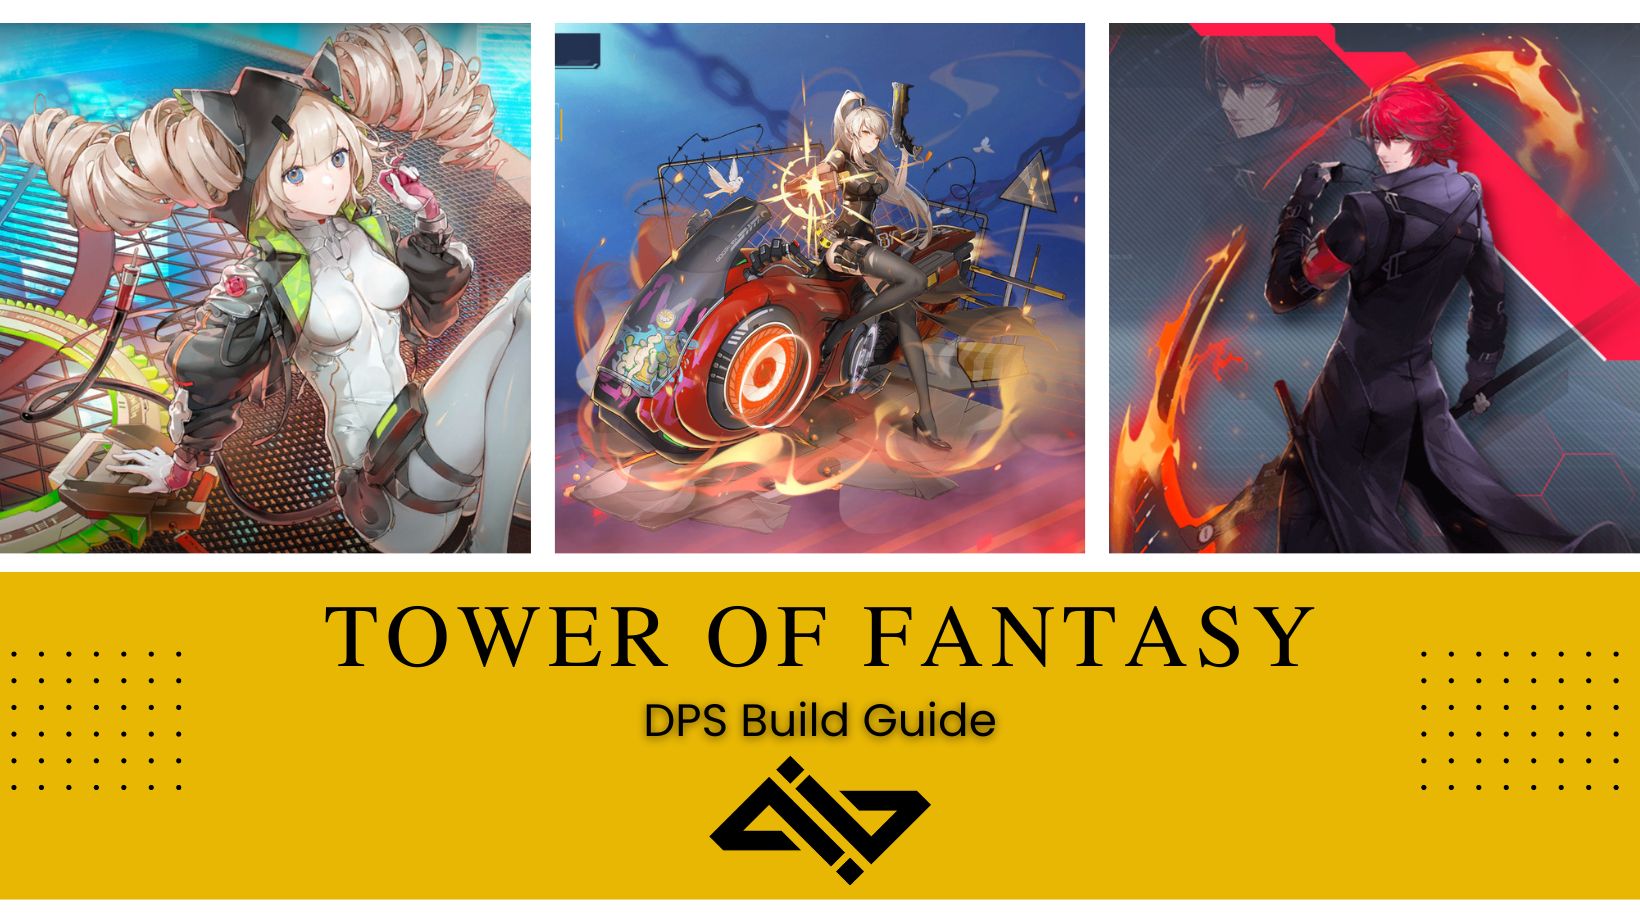 Tower of Fantasy DPS Build